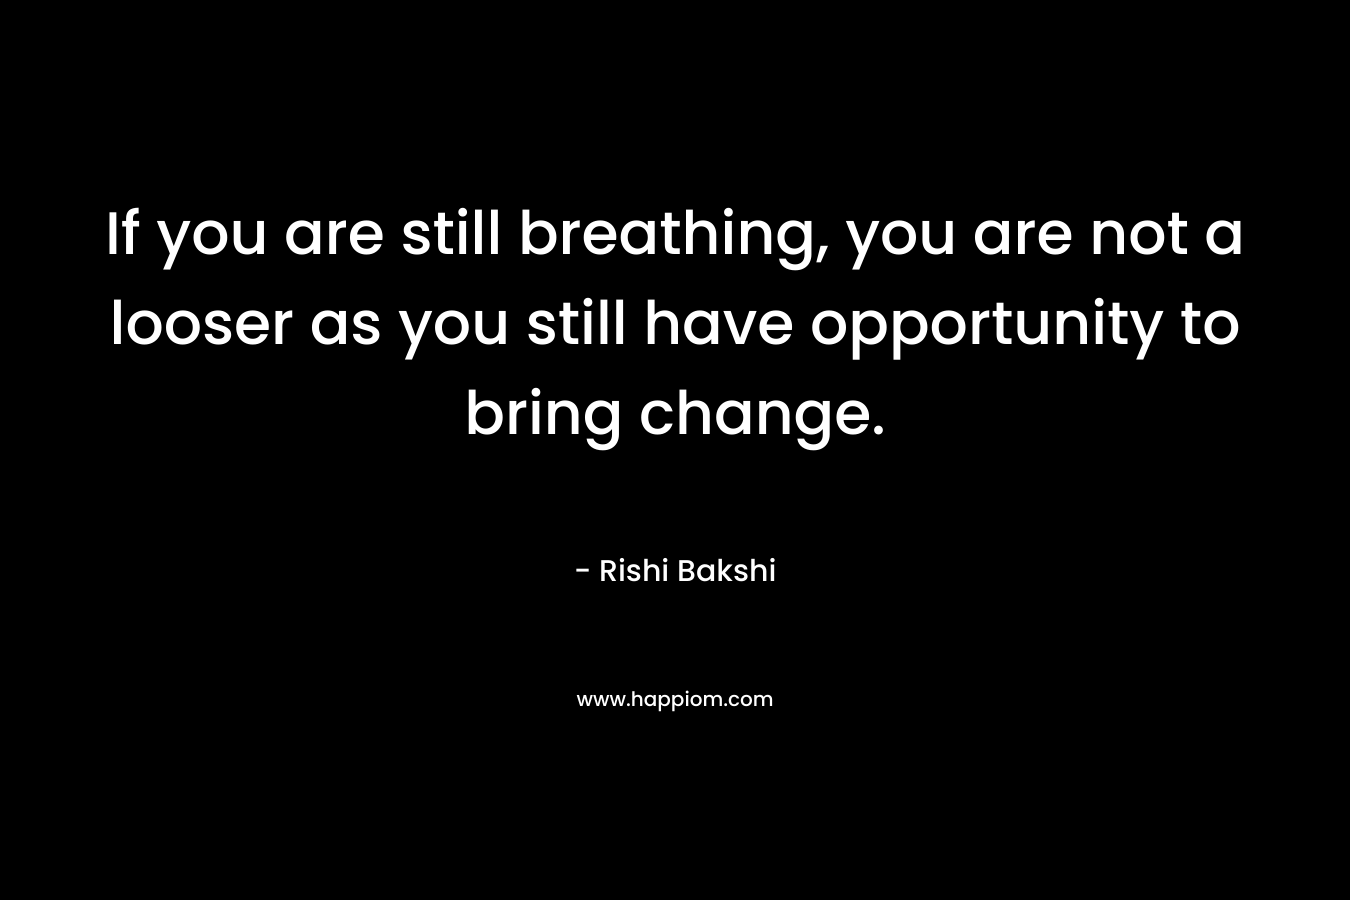 If you are still breathing, you are not a looser as you still have opportunity to bring change.